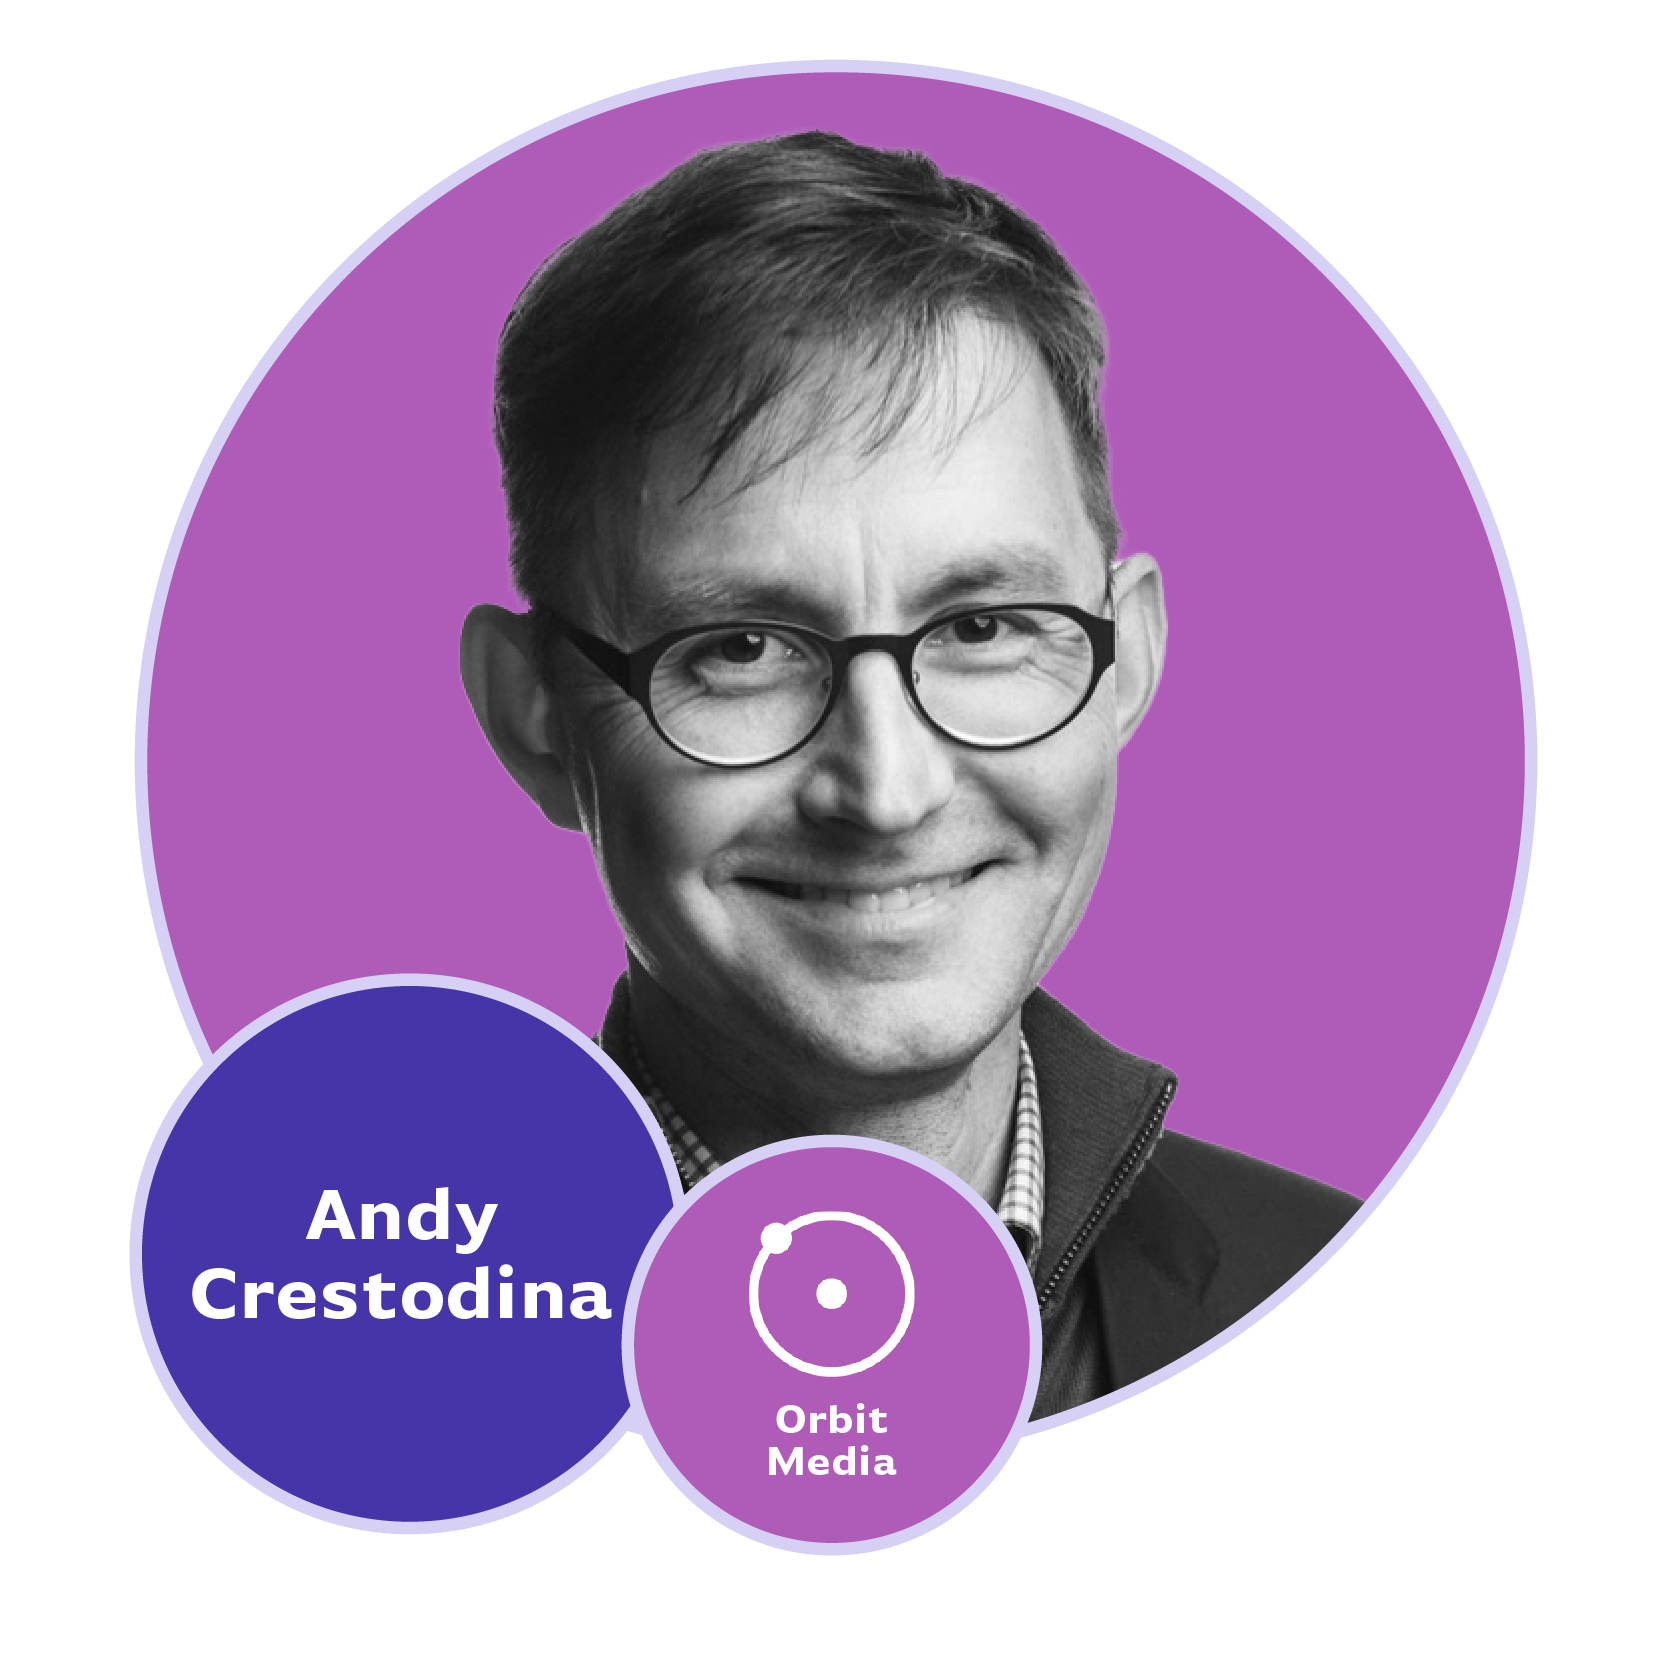 Headshot graphic of Andy Crestodina in a circle with his name and company title, Orbit Media